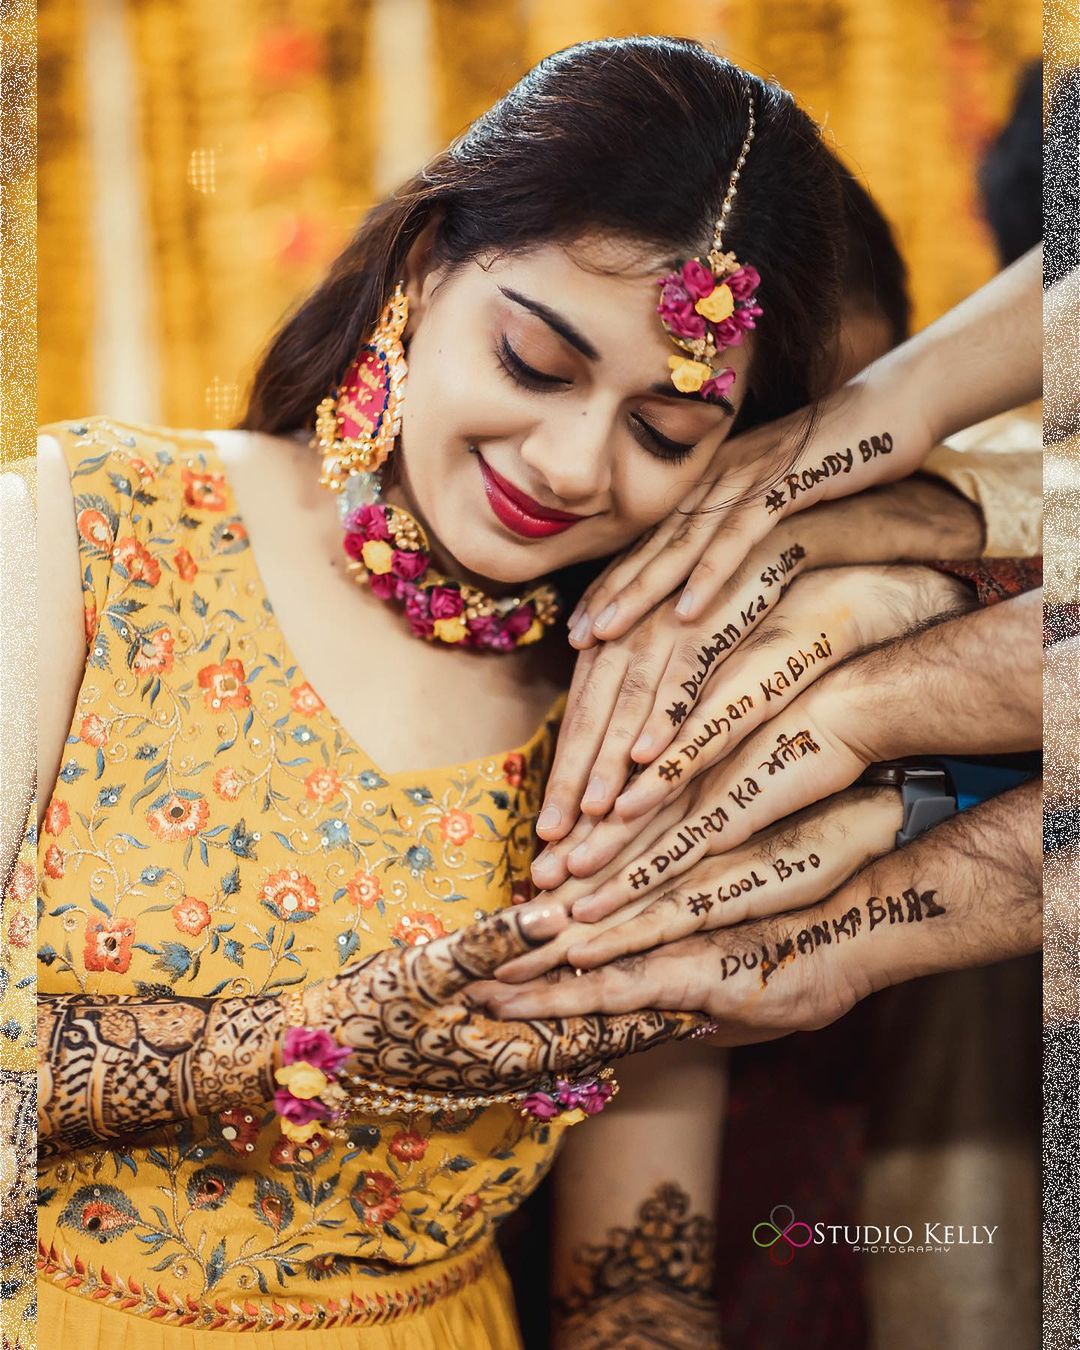 Steal-Worthy South Indian Bridesmaids Photoshoot Ideas For Weddings |  Bridesmaid photoshoot, Bride photos poses, Indian bride photography poses